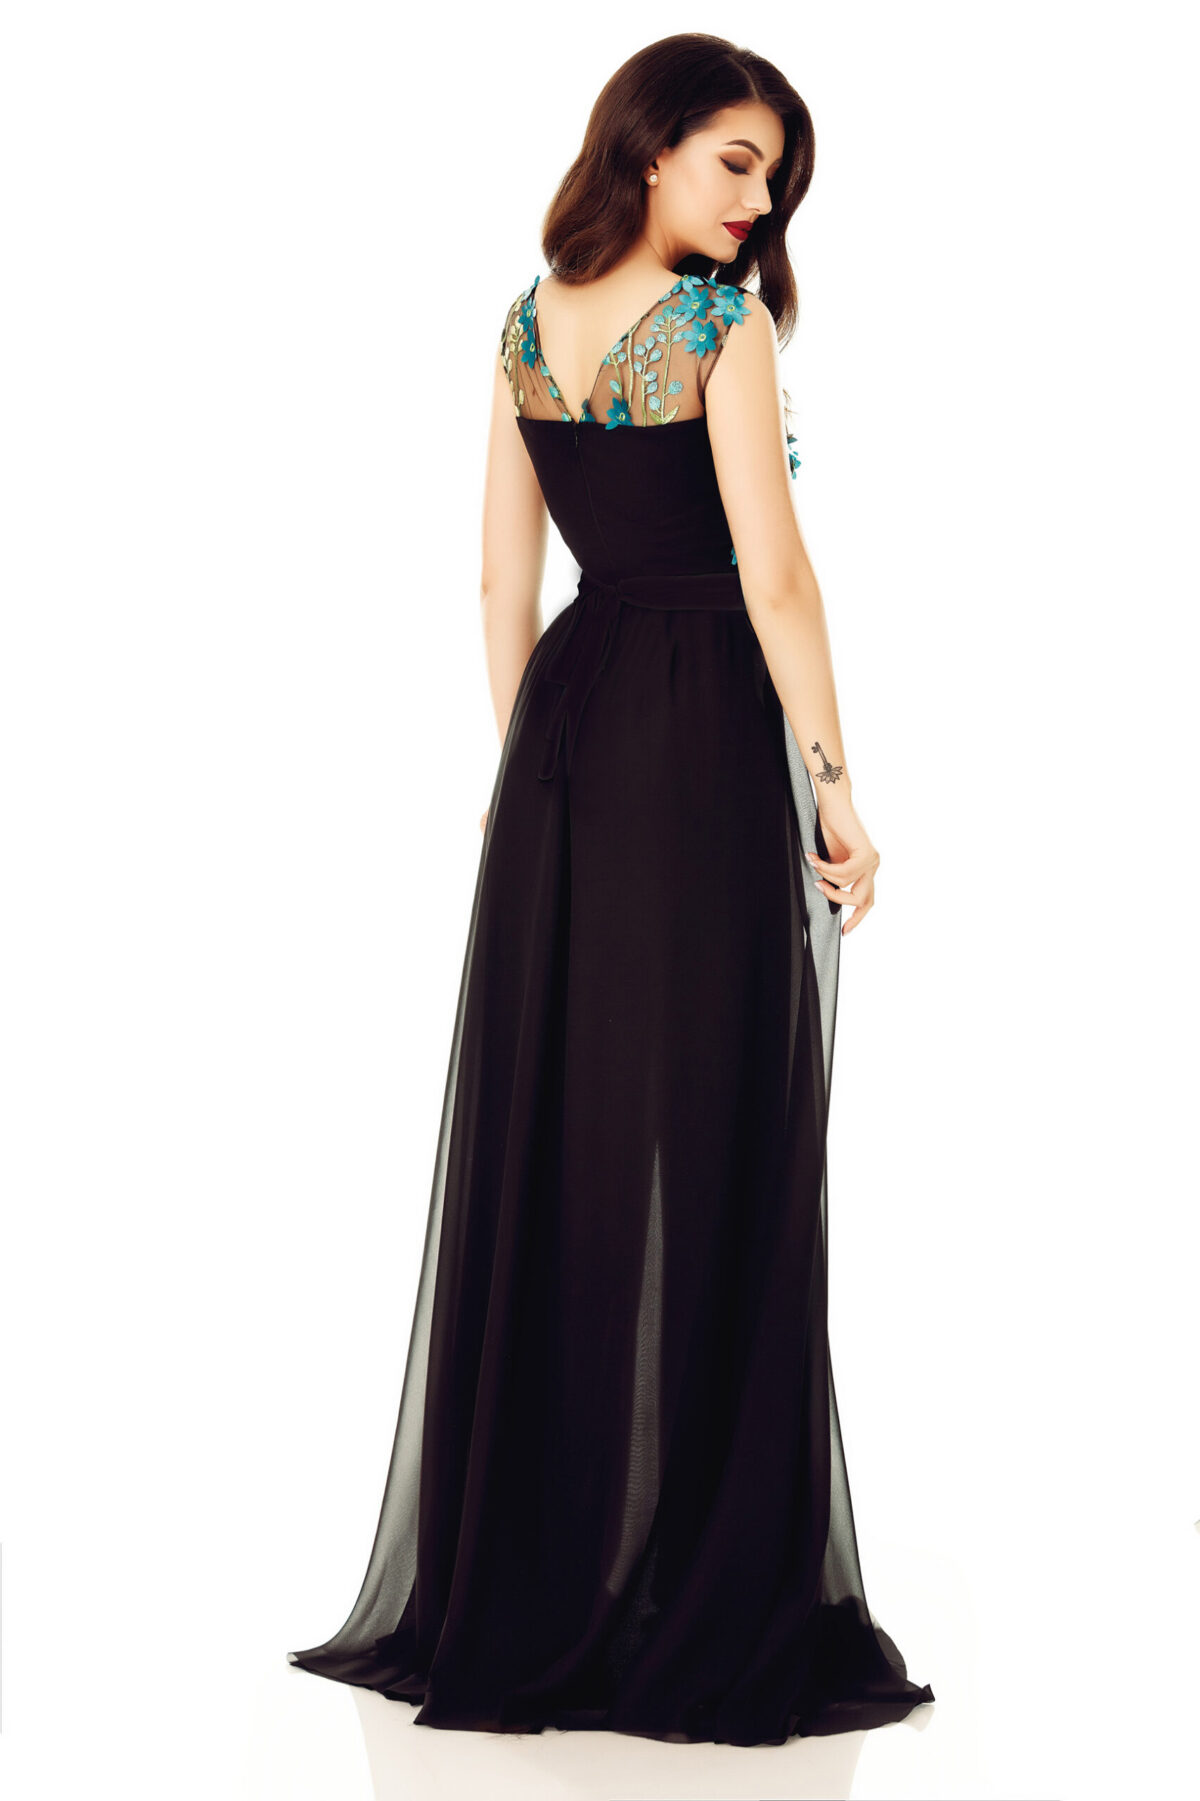 Long Black Dress Of Voile With Delicate Lace Bust And Turquoise Flowers